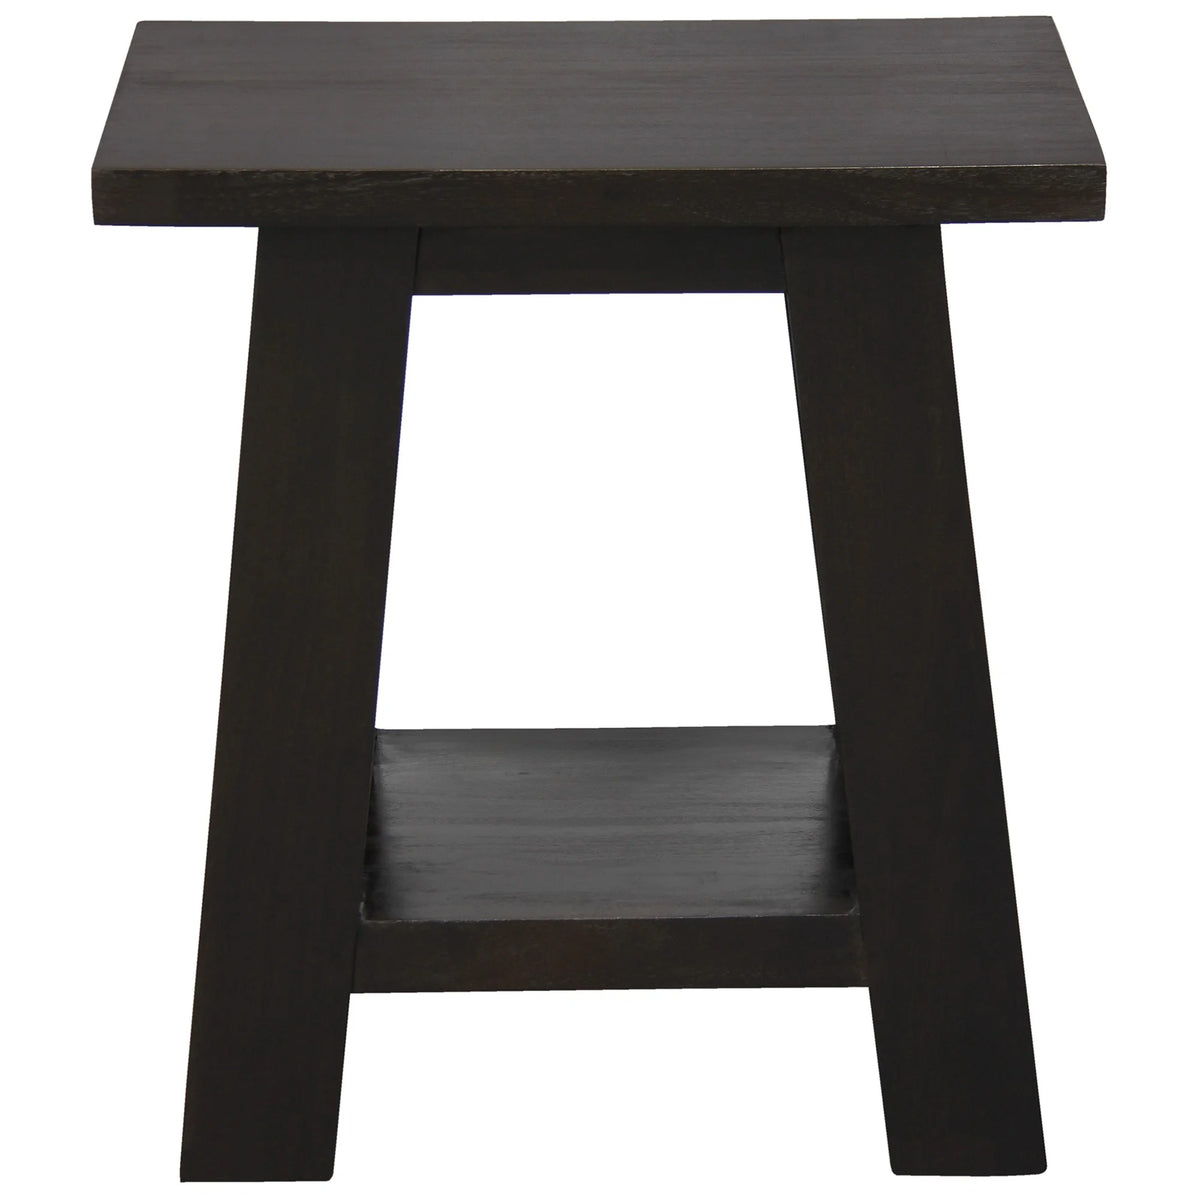 Zimra Solid Timber Lamp Table - Chocolate - Notbrand